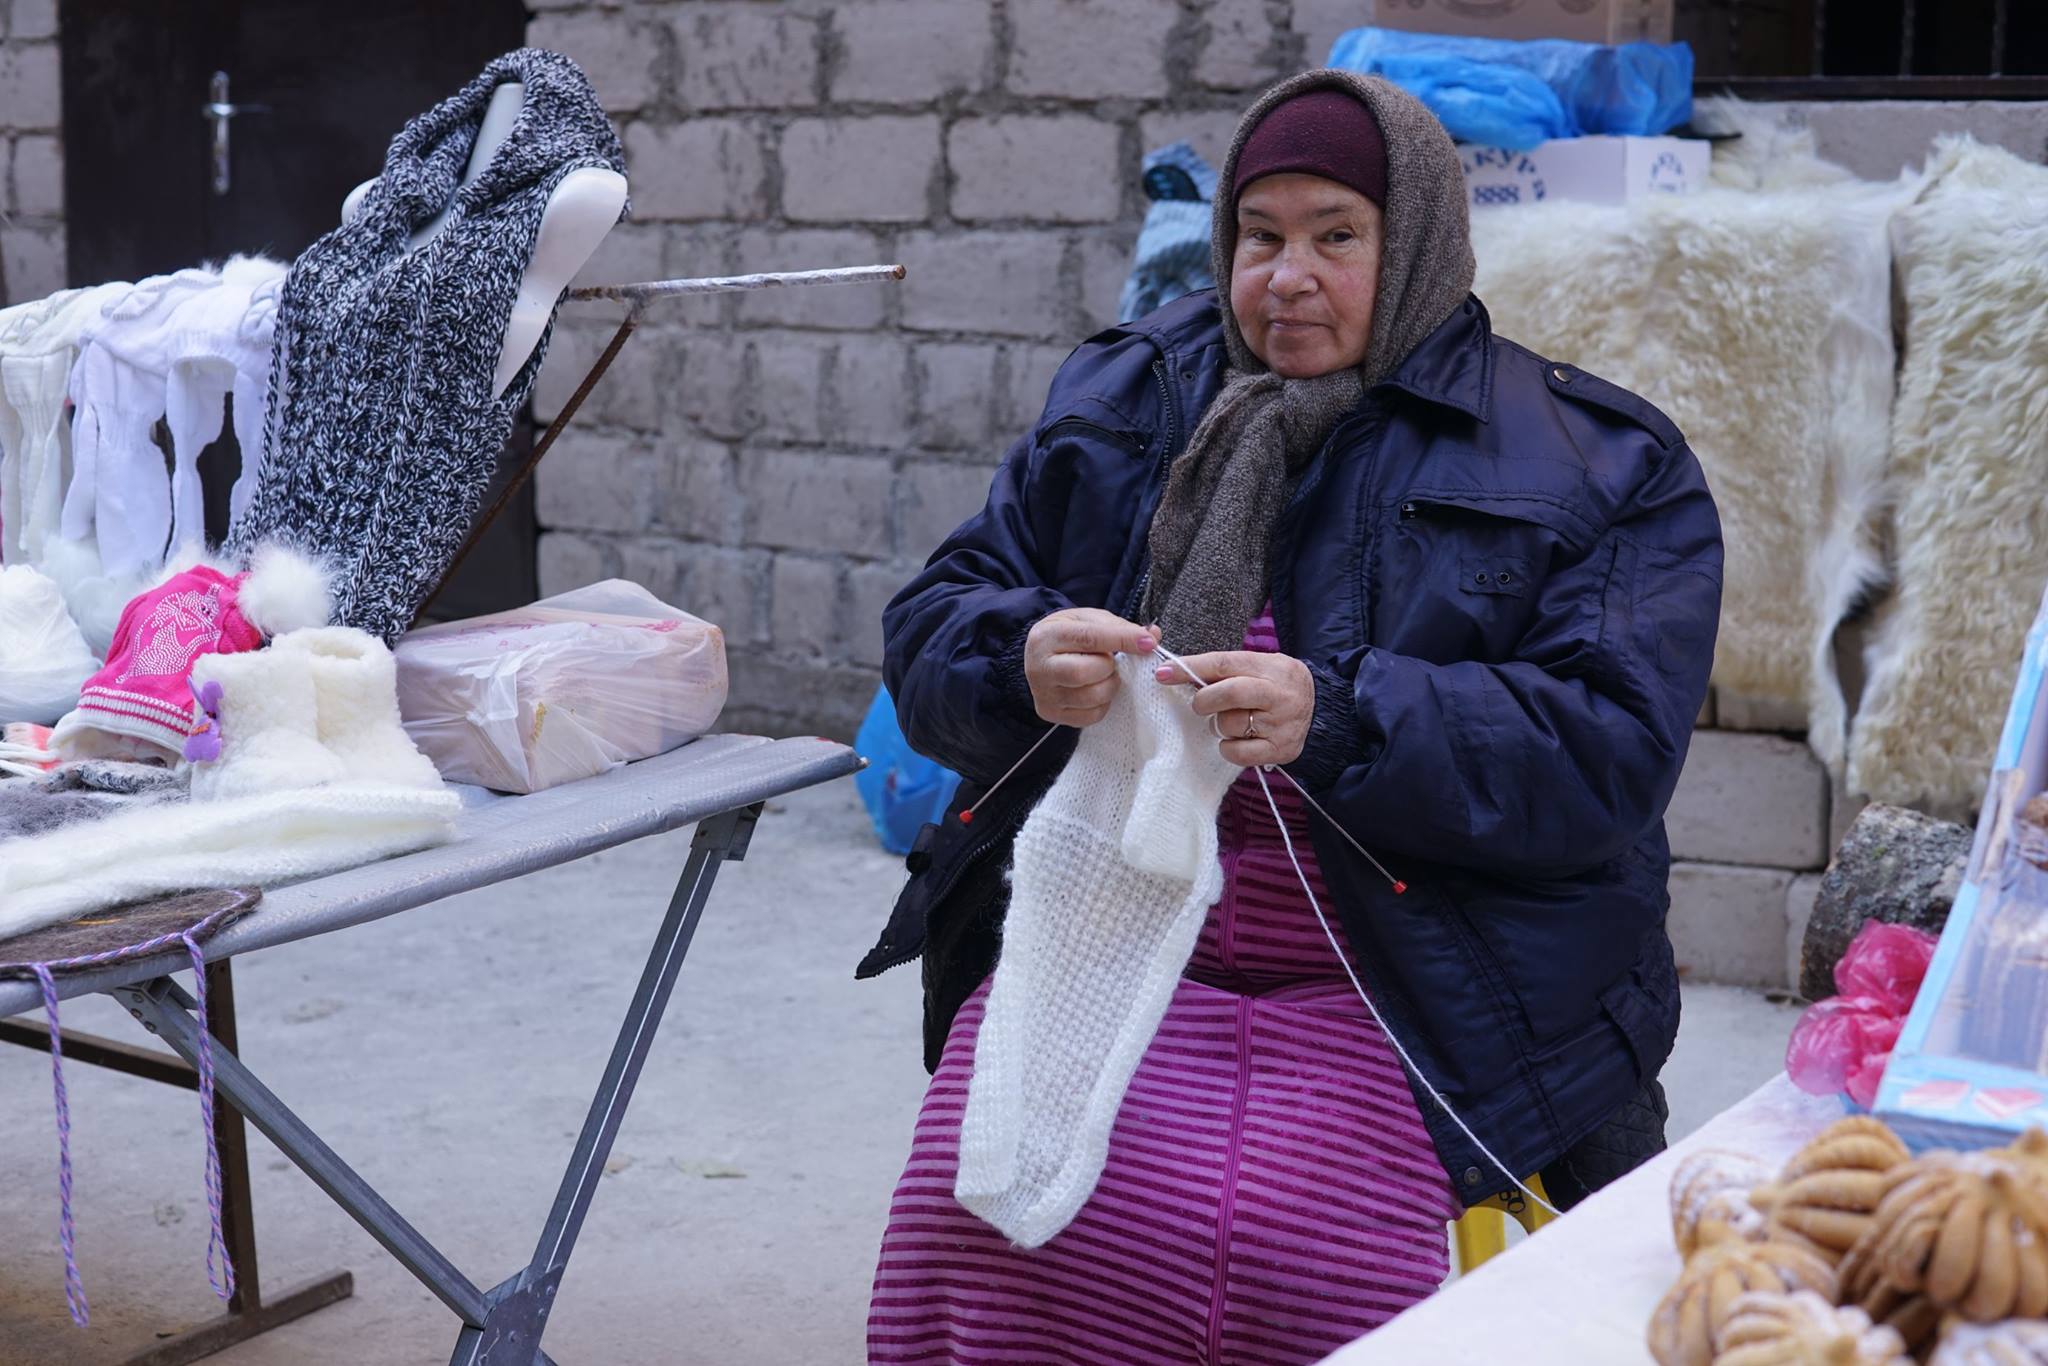 Woman is knitting at the market